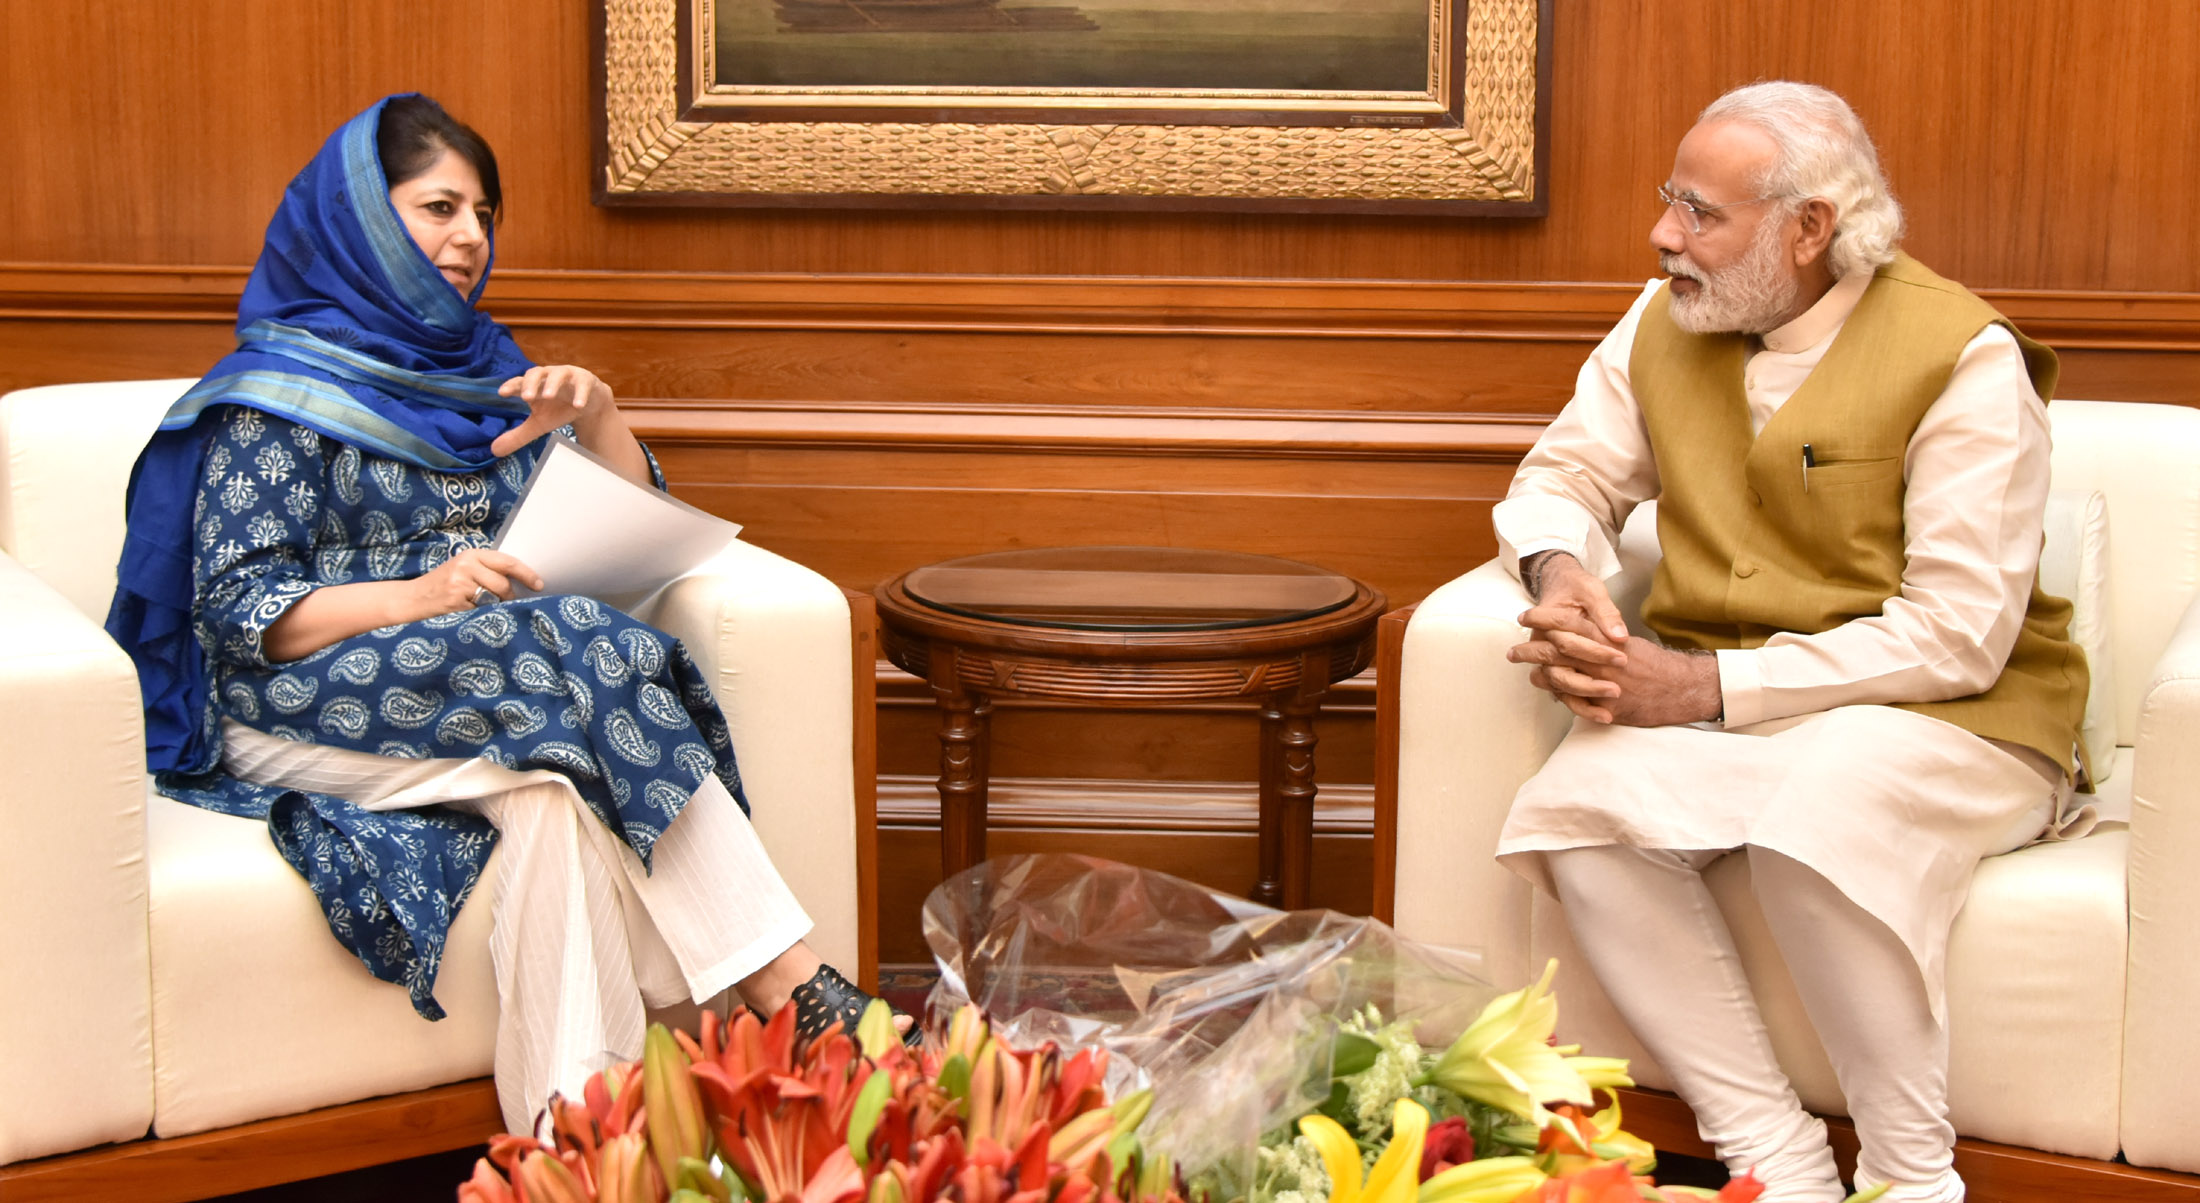 The Chief Minister of Jammu and Kashmir, Ms. Mehbooba Mufti calls on the Prime Minister, Shri Narendra Modi, in New Delhi on April 13, 2016.